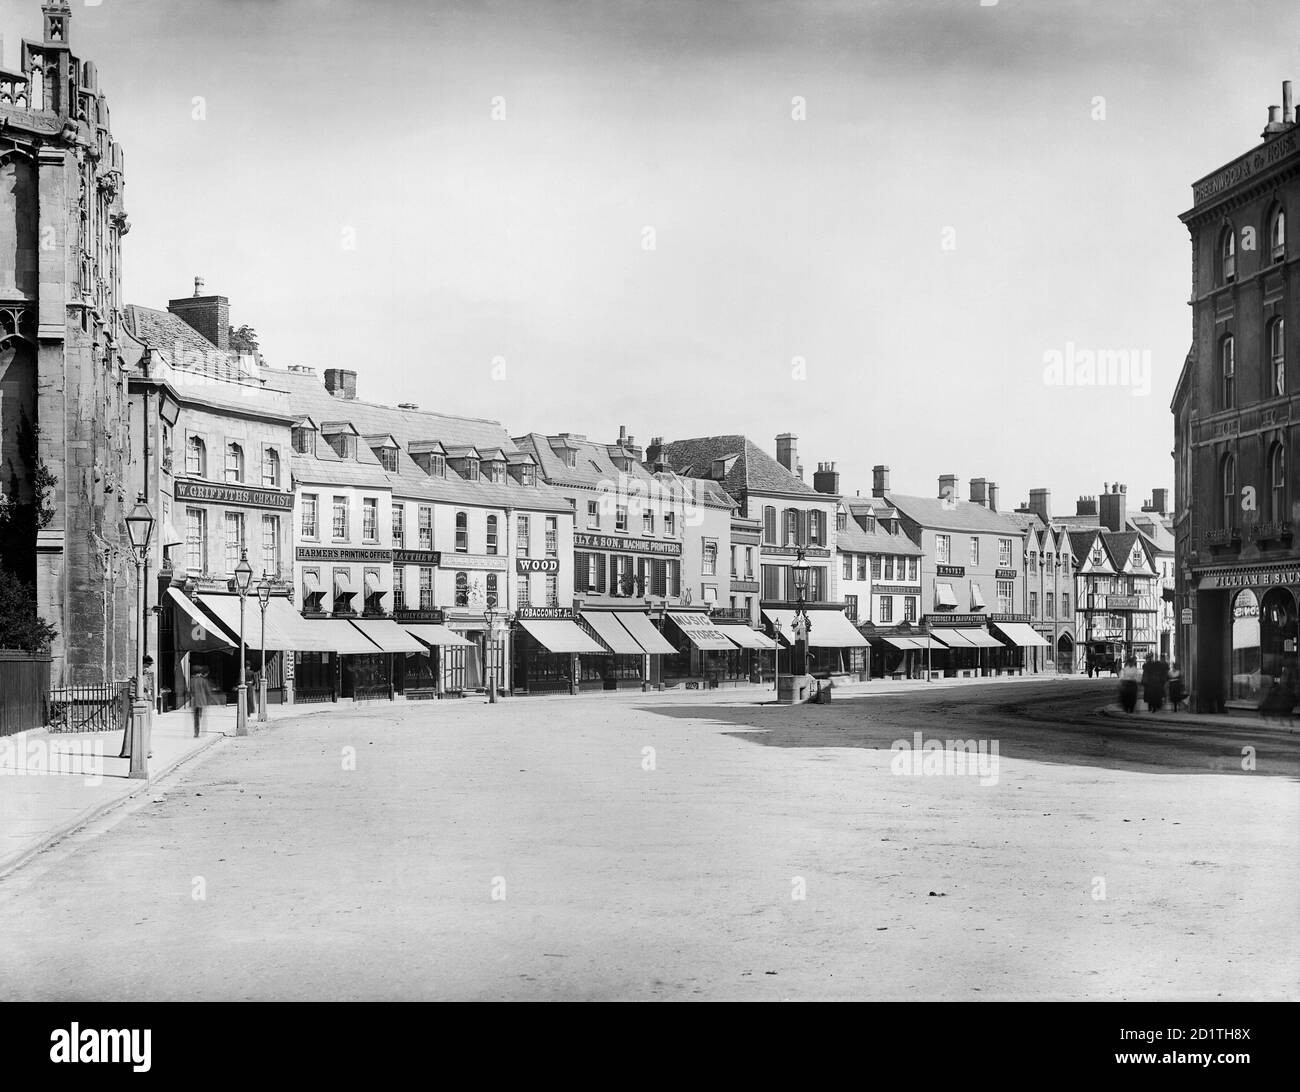 CIRENCESTER, Gloucestershire. Looking down the market place from the parish church of the capital of the Cotswolds. Showing the north side shop fronts with their awnings out over the pavement. Photographed in 1883 by Henry Taunt. Stock Photo